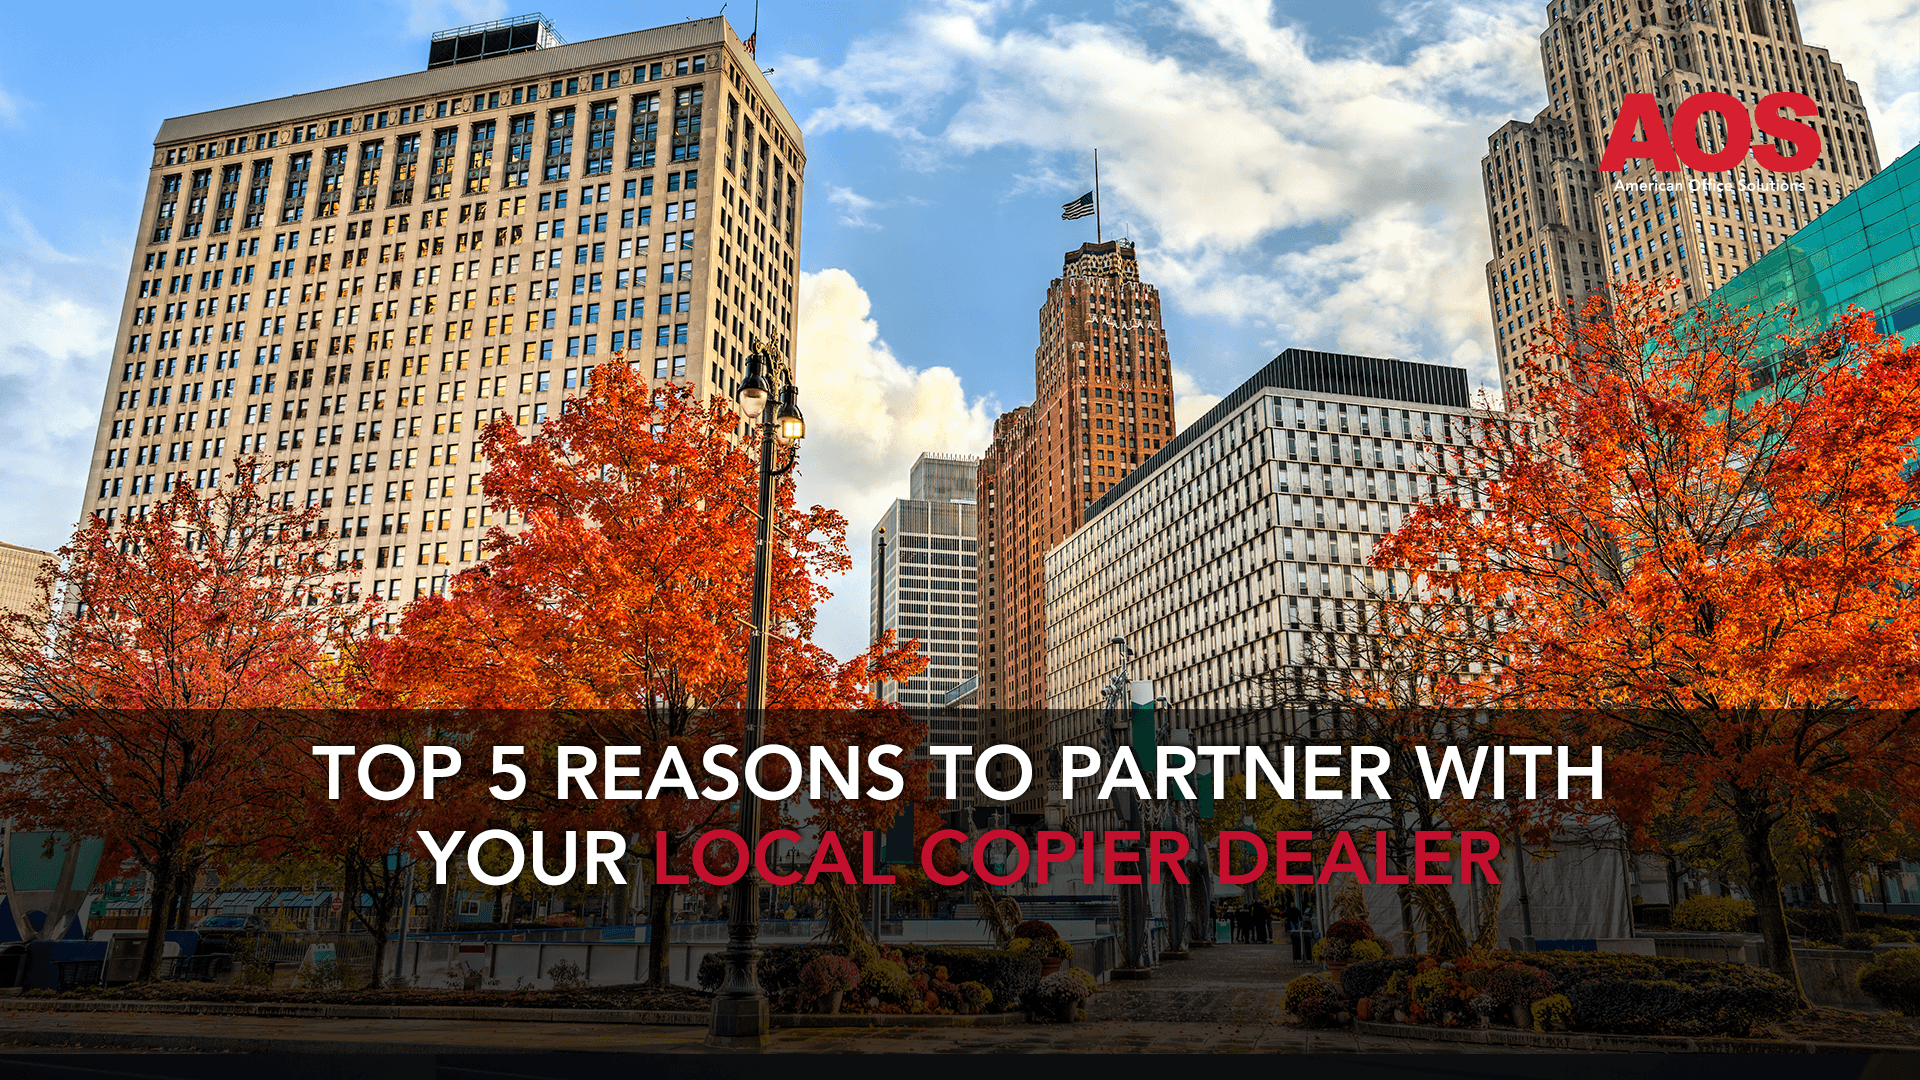 Top 5 Reasons to Partner with Your Local Office Copier Dealer